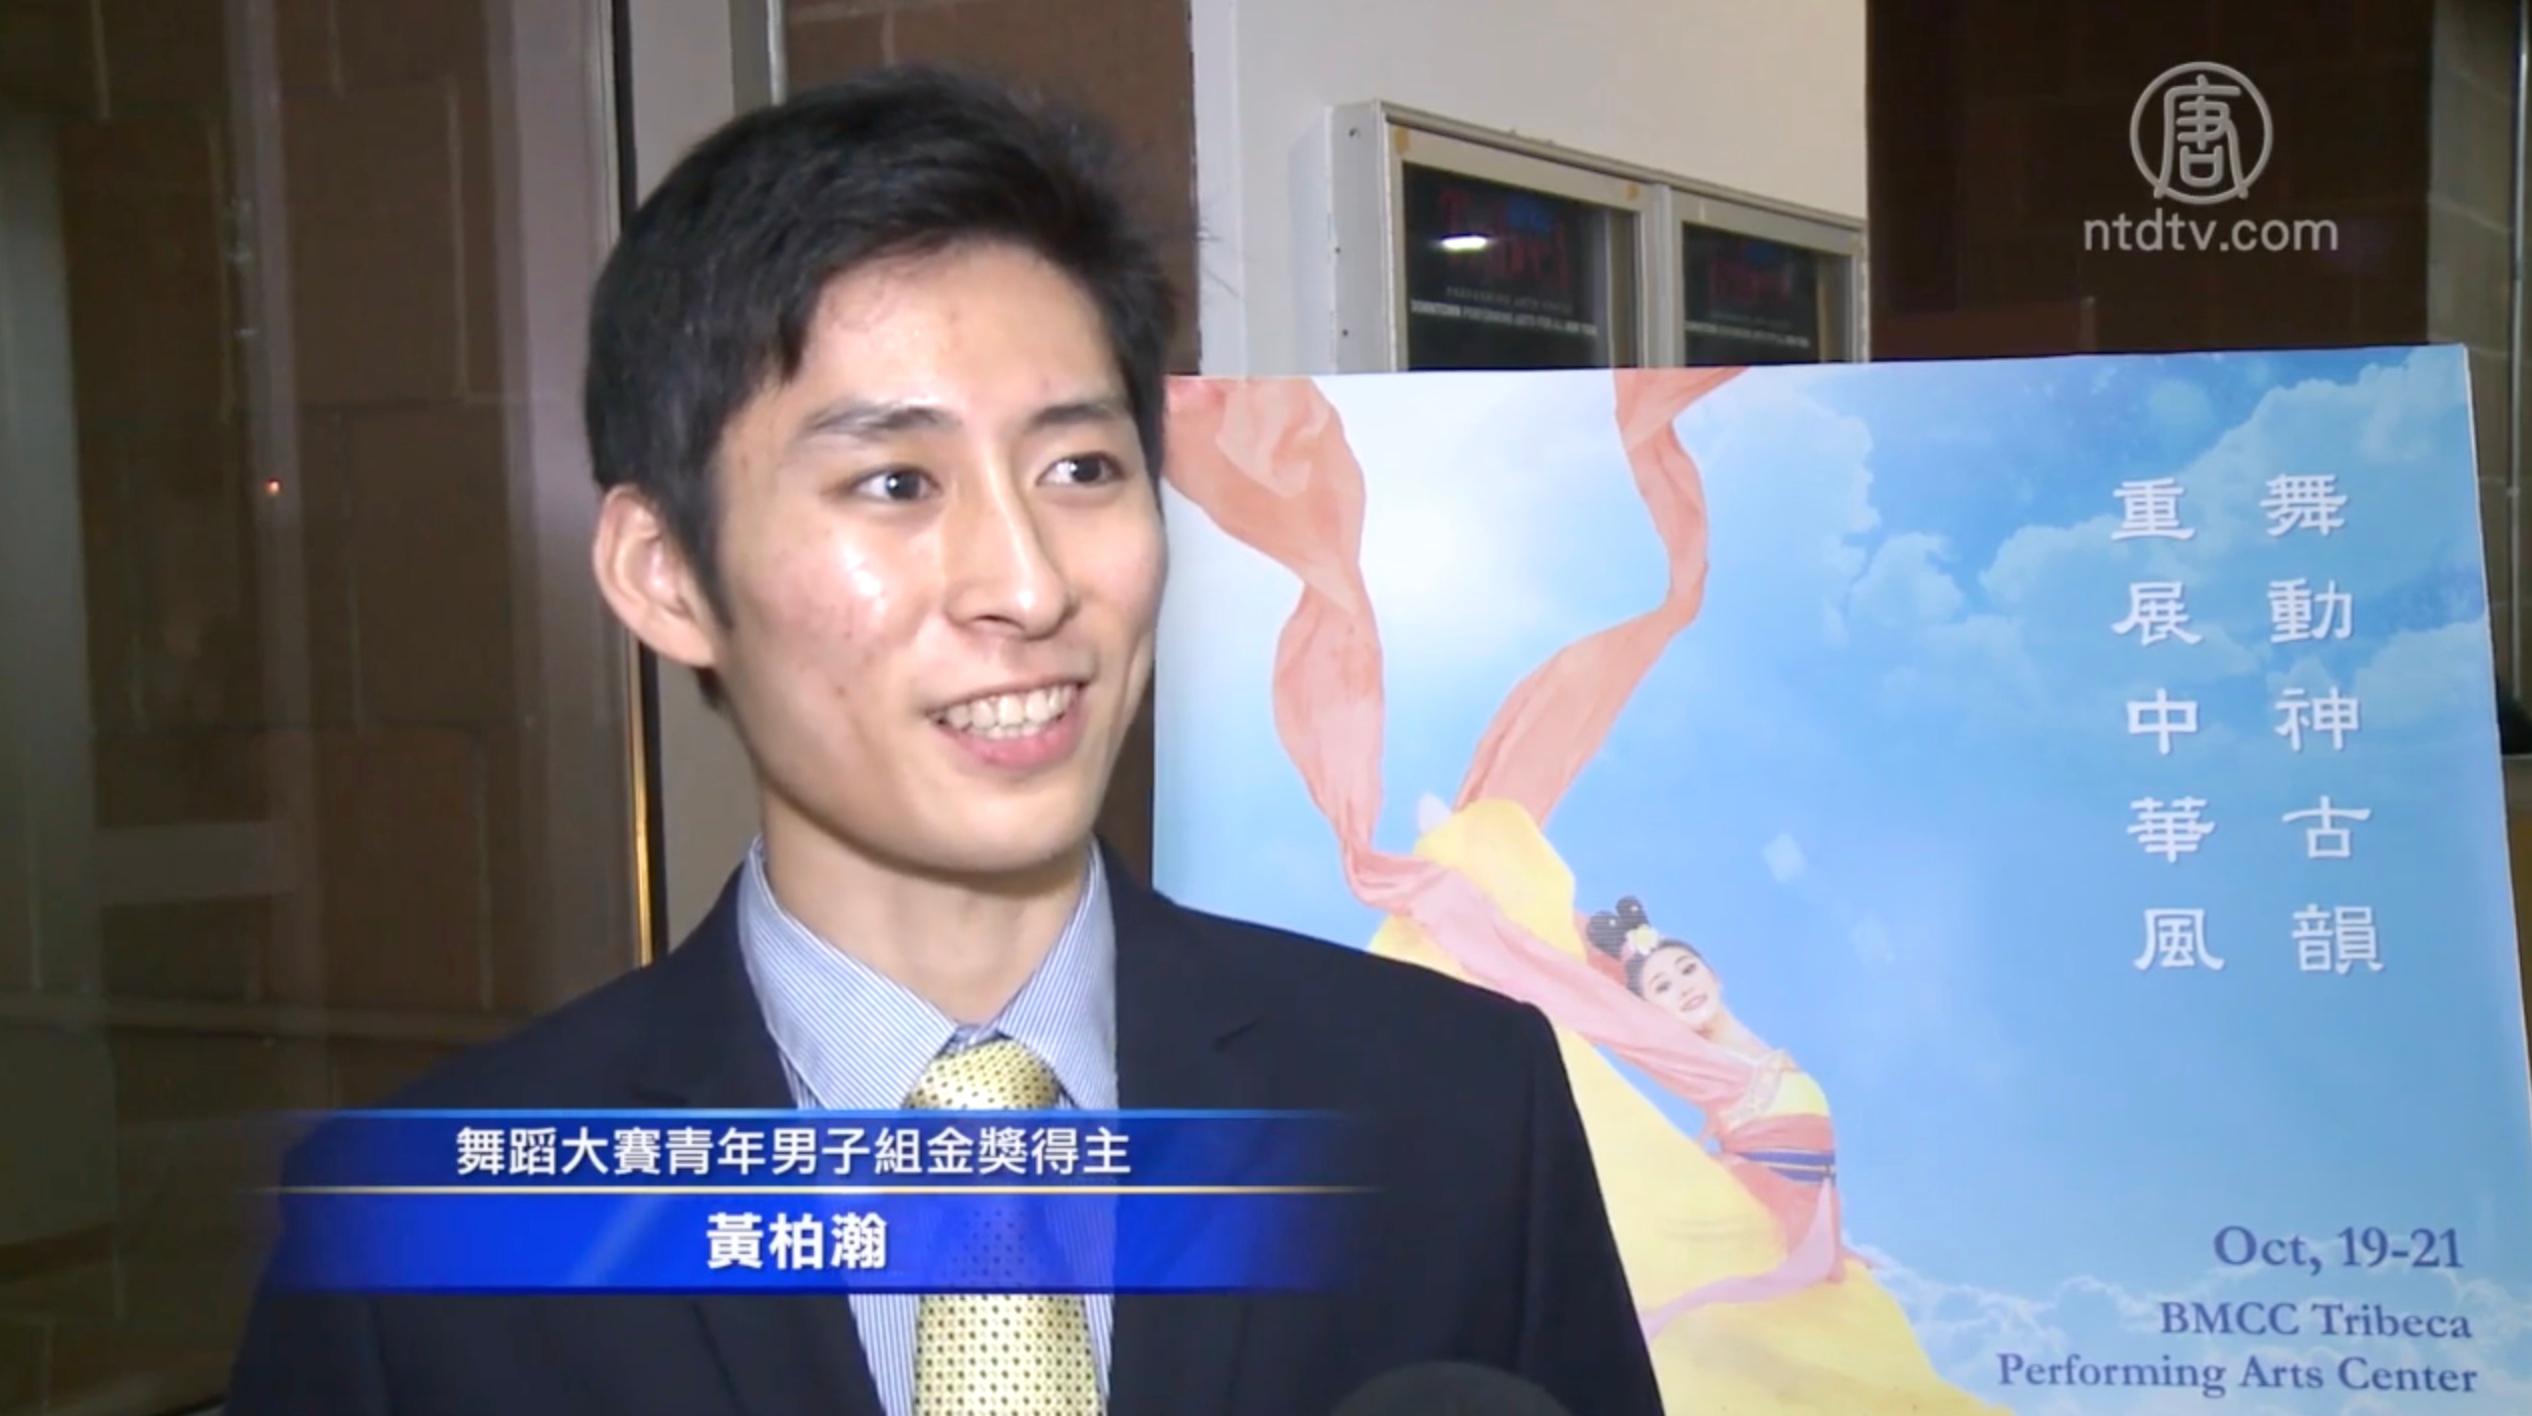 Gold Award Recipient of Classical Dance Competition: Traditional Chinese Culture Is Where My Heart Is 